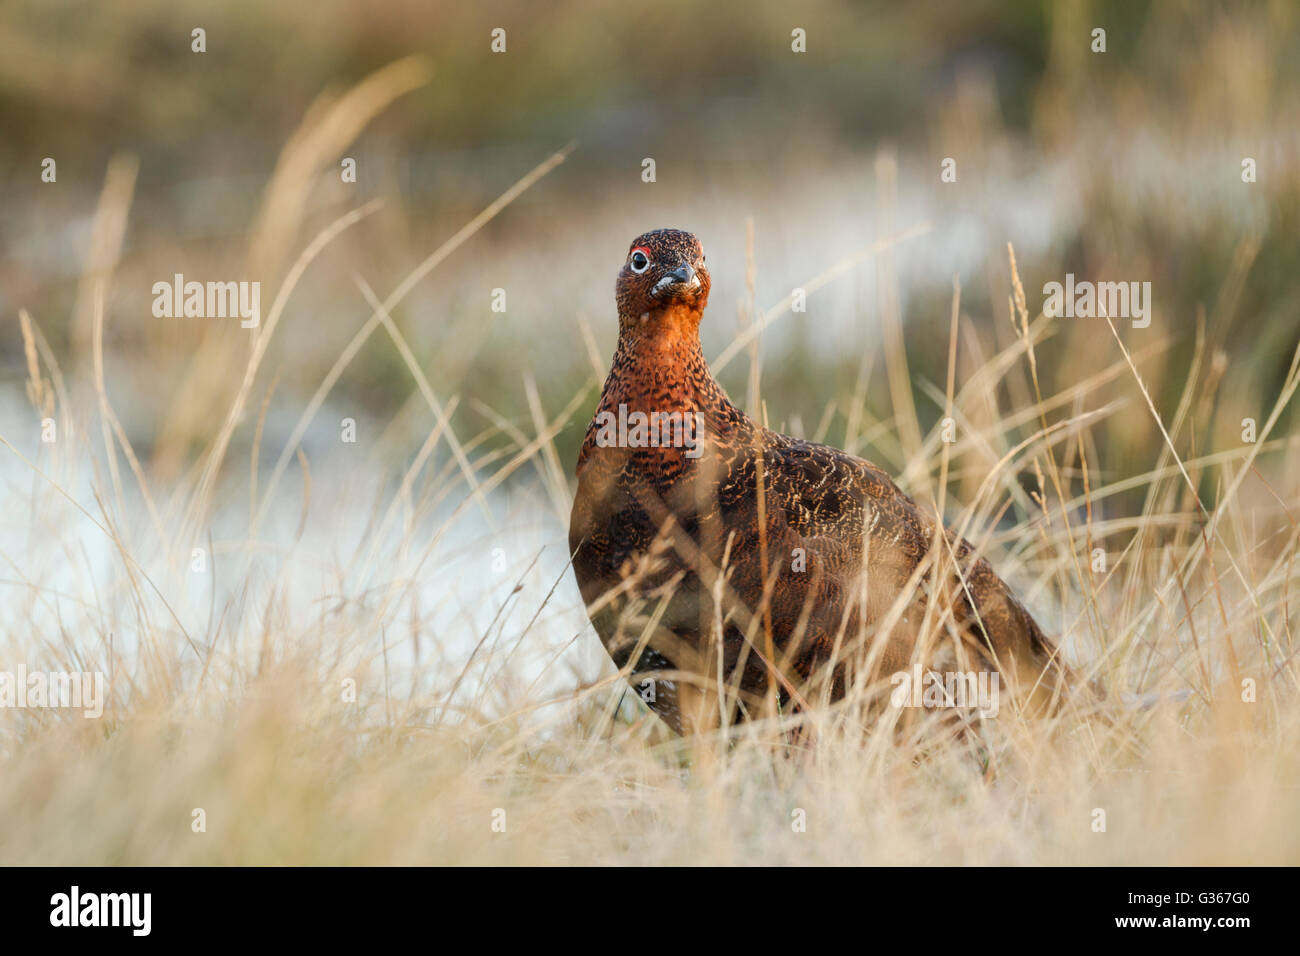 Male red grouse, Latin name Lagopus lagopus scotica, in warm light standing among rough grasses Stock Photo